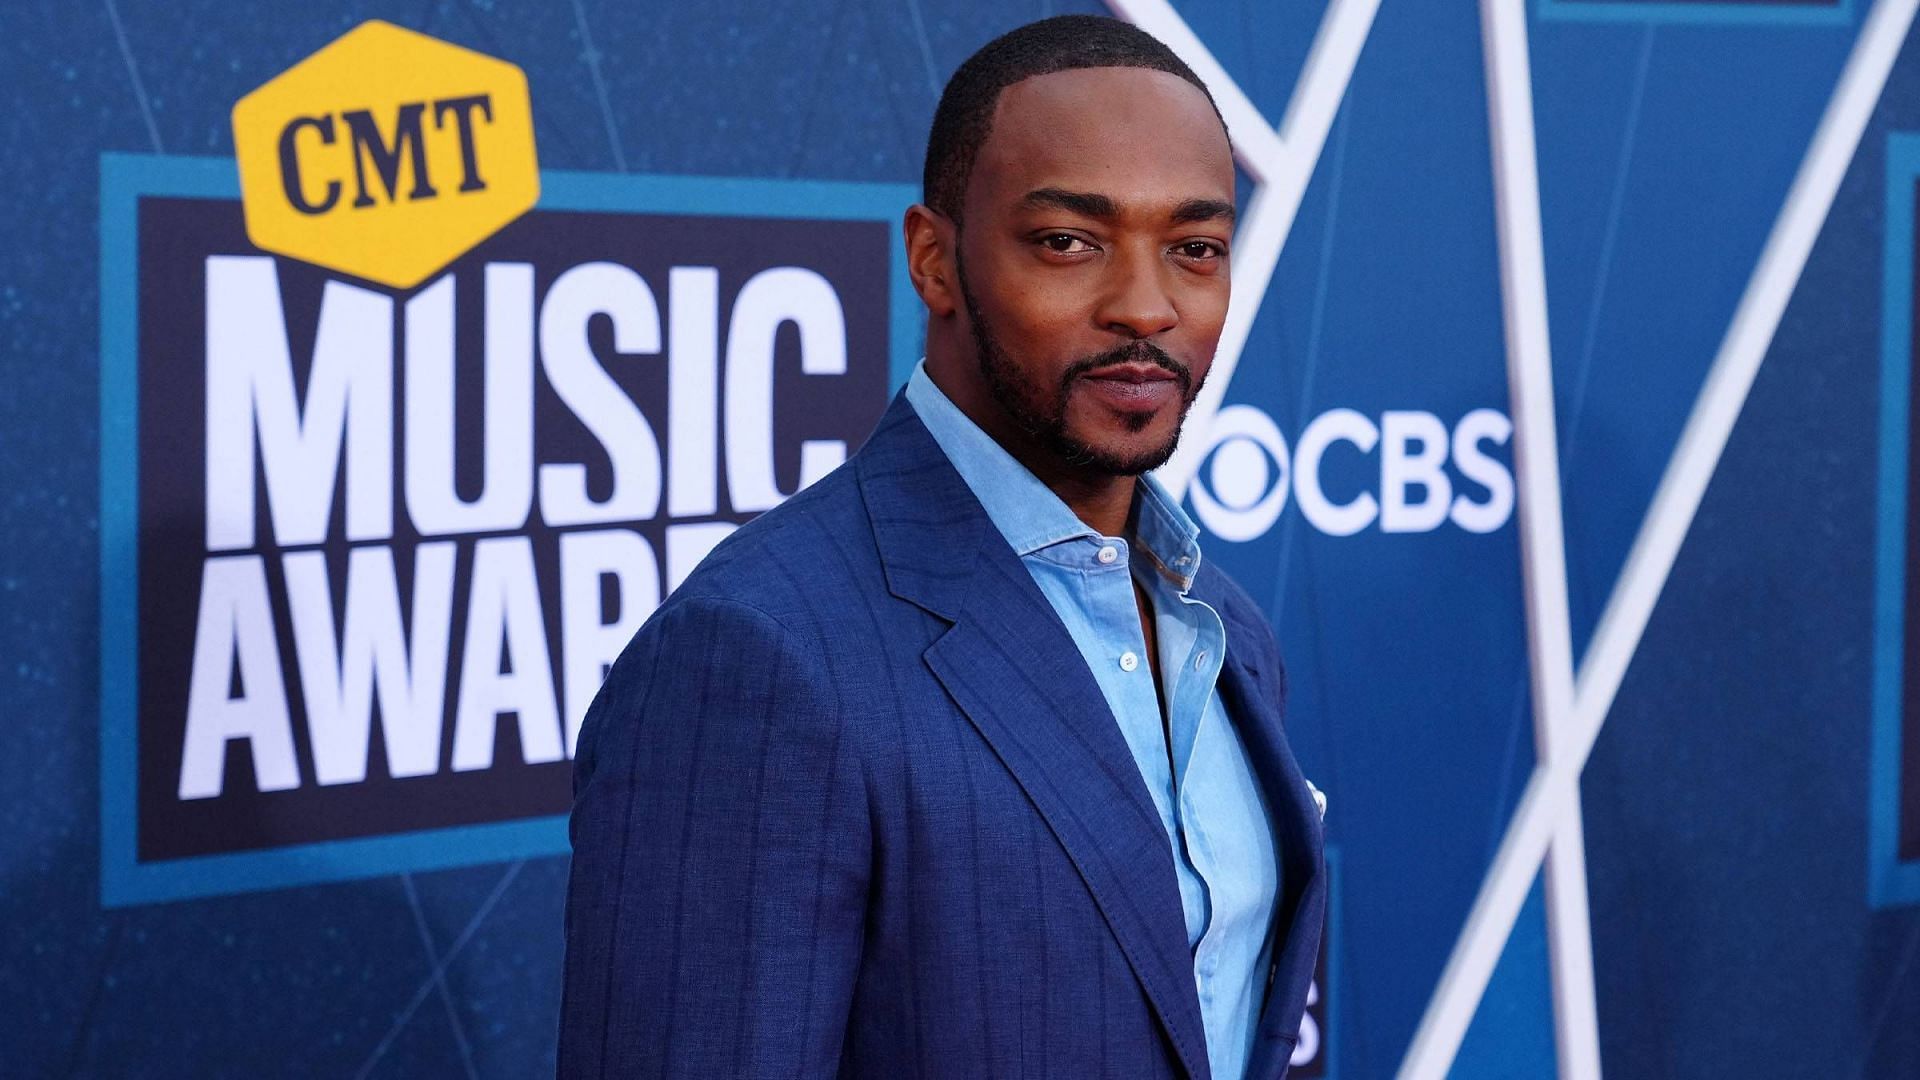 Anthony Mackie: A leading voice for change in Hollywood&#039;s shifting landscape (Image via Getty)